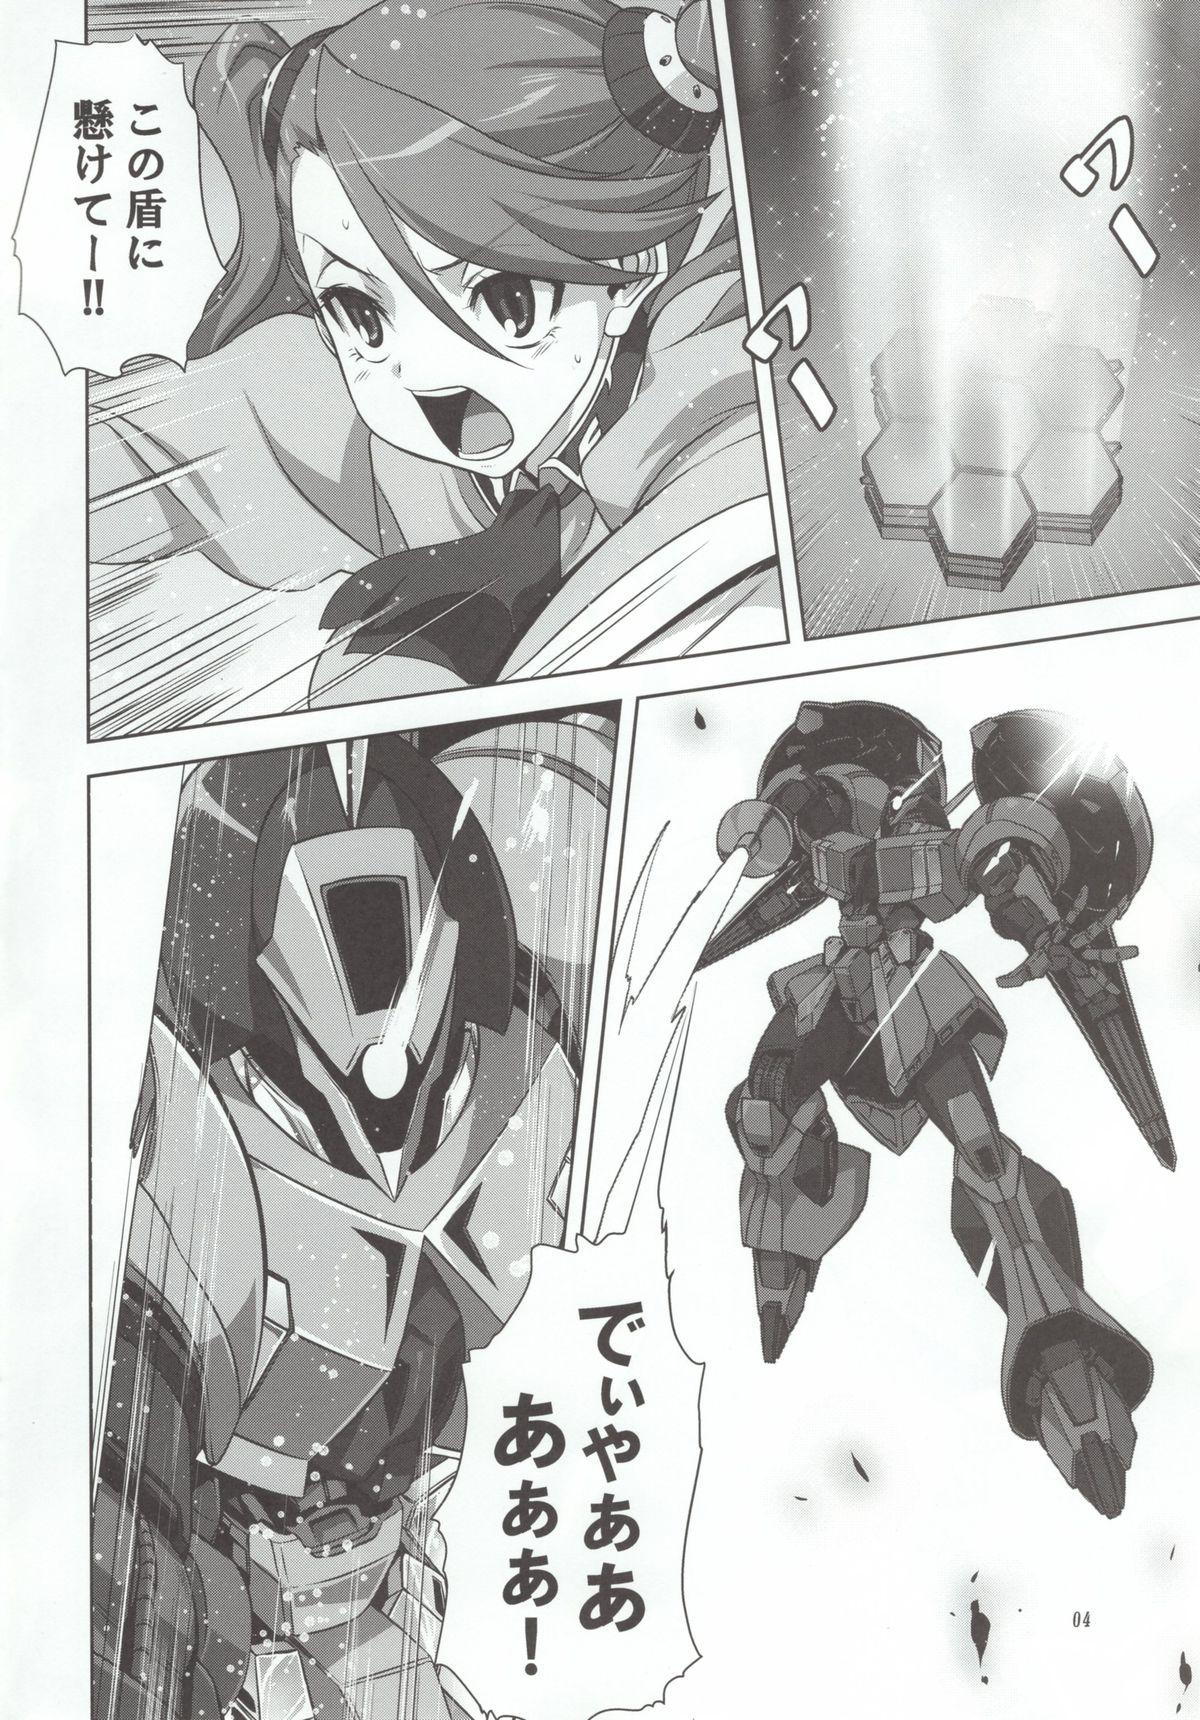 Con Try Fight! - Gundam build fighters try Lick - Page 4